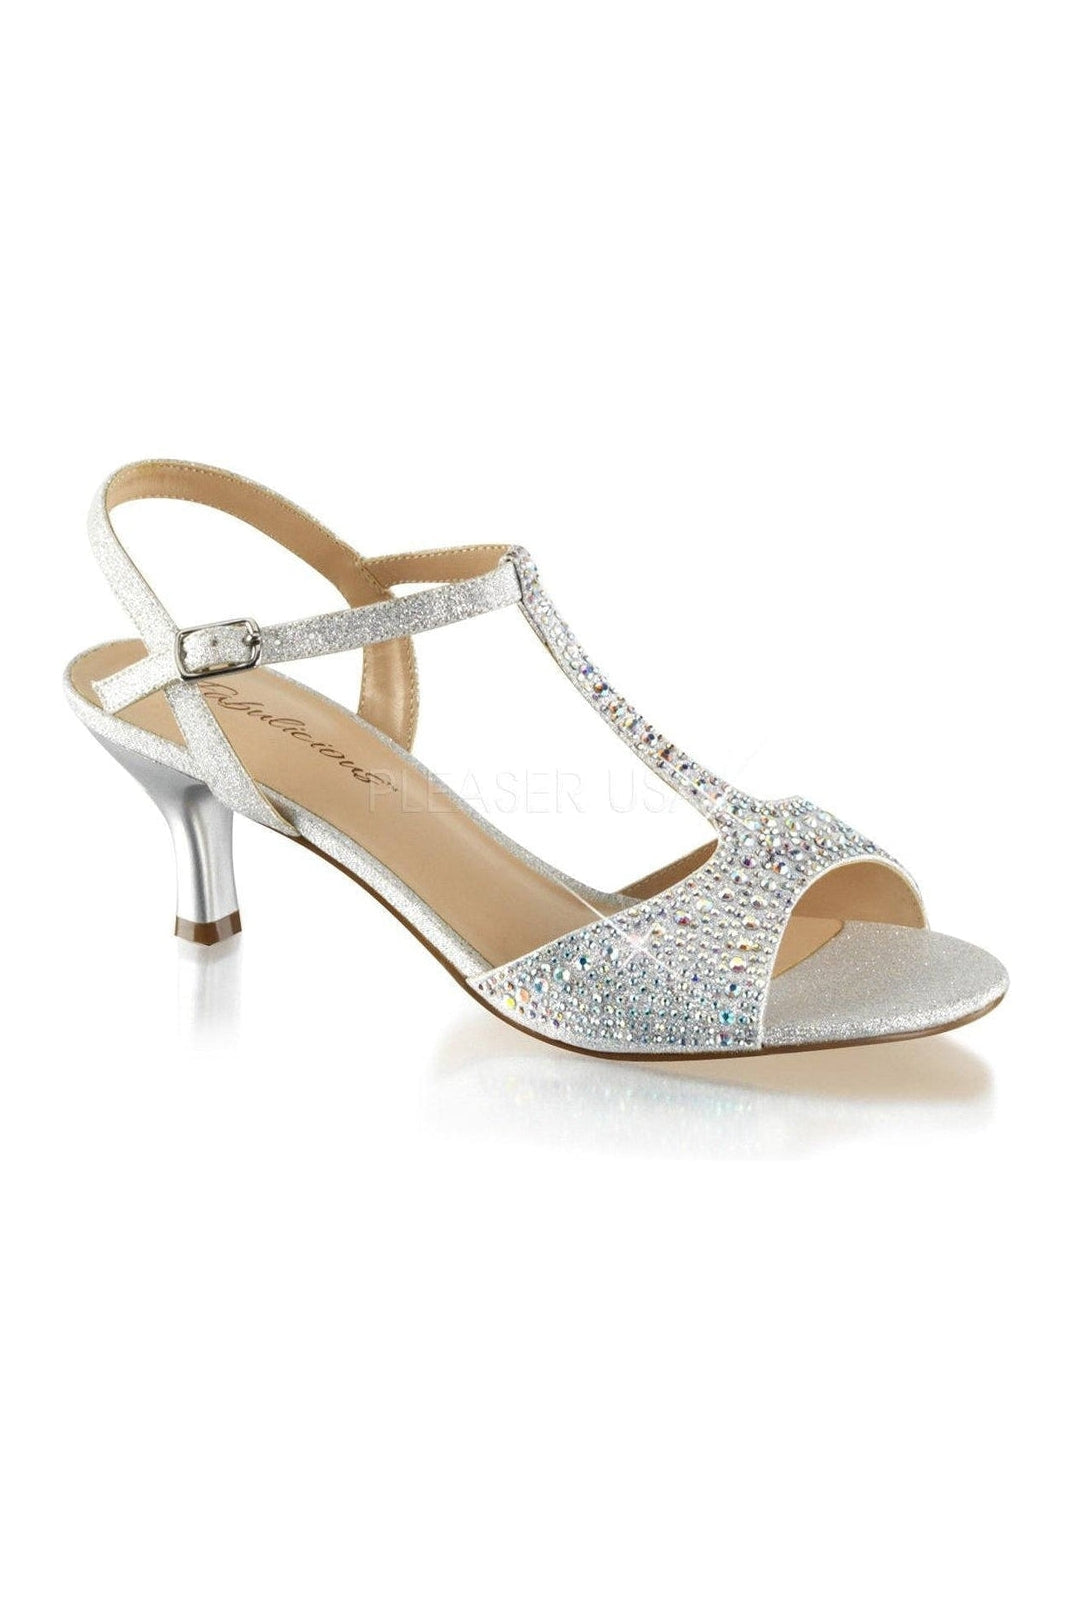 AUDREY-05 Sandal | Silver Fabric-Fabulicious-Silver-Sandals-SEXYSHOES.COM